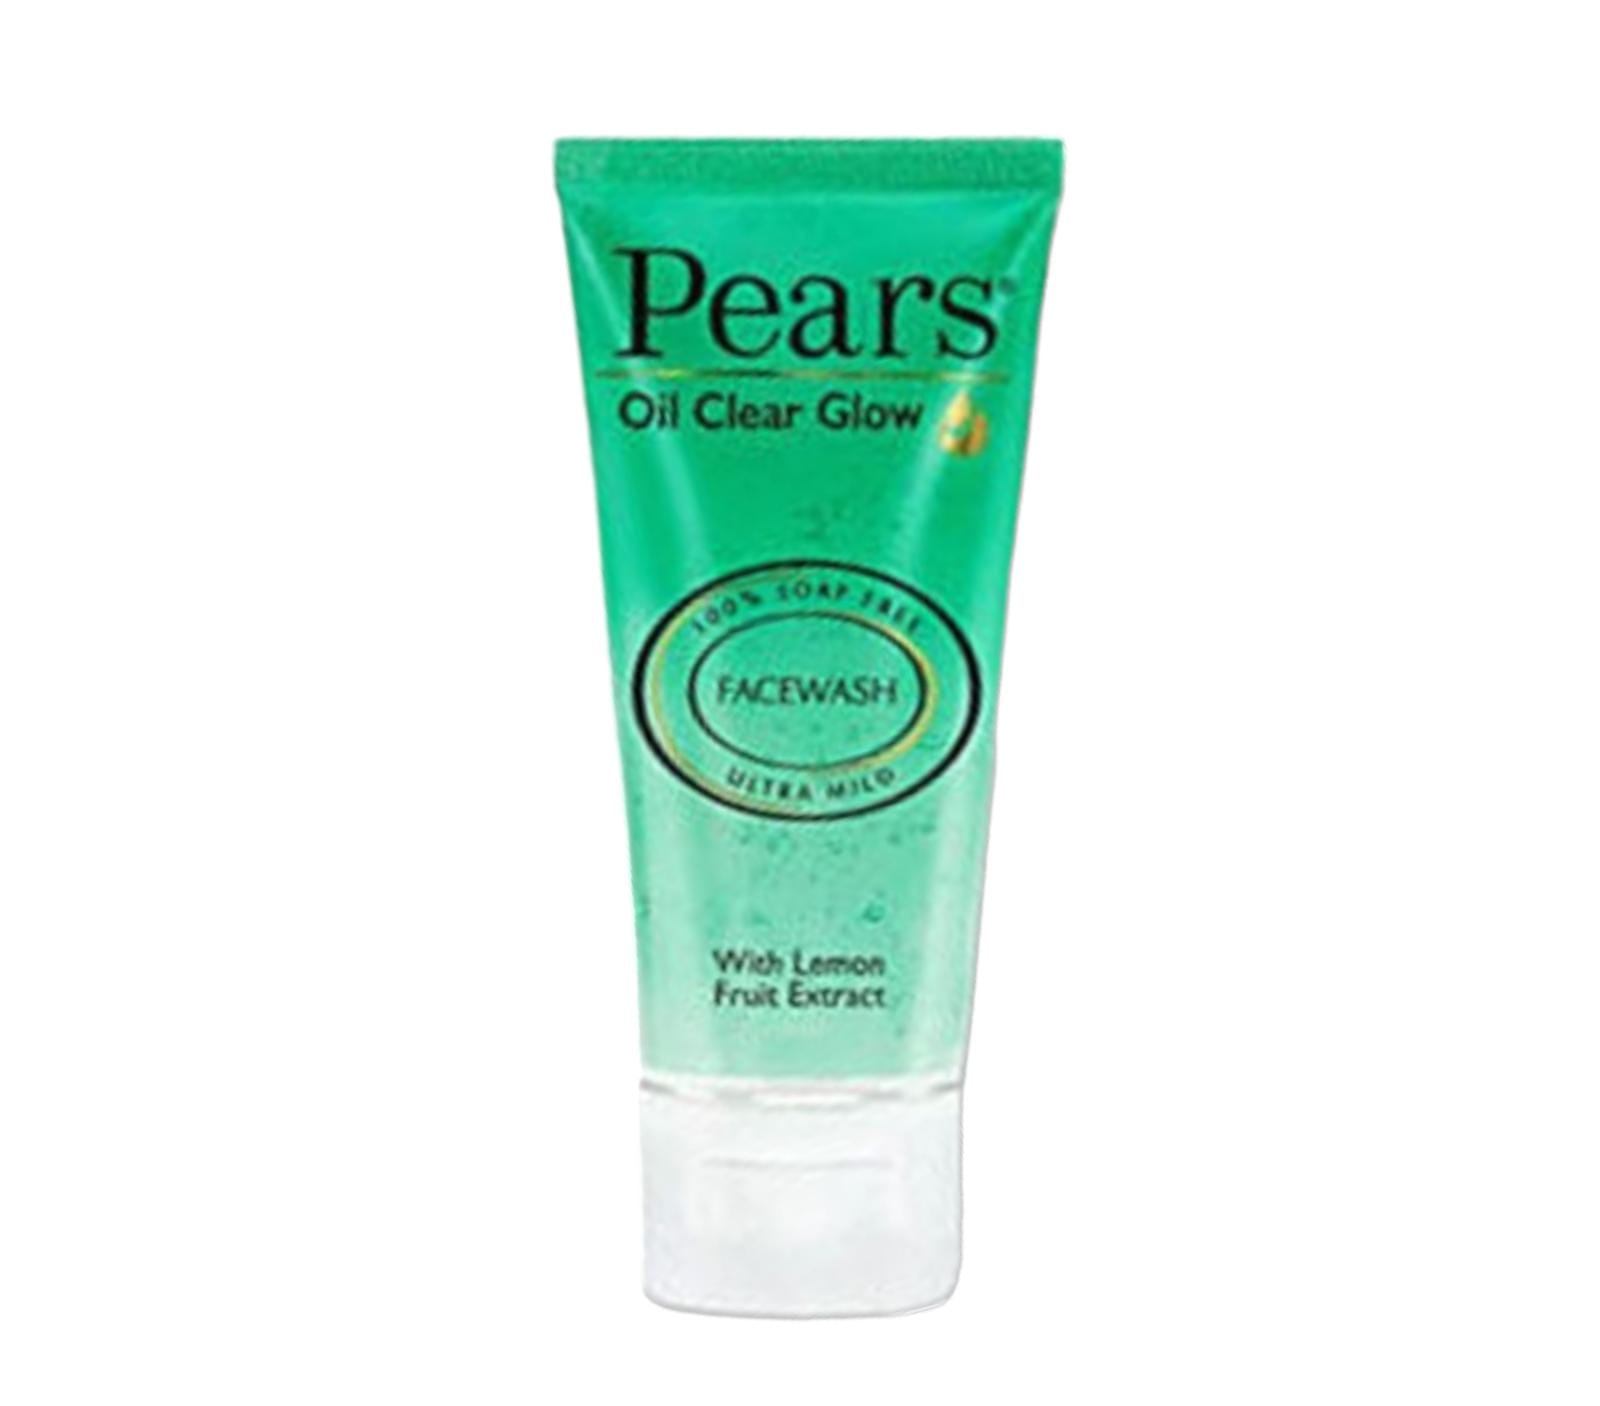 Pears Oil Clear Glow Face wash